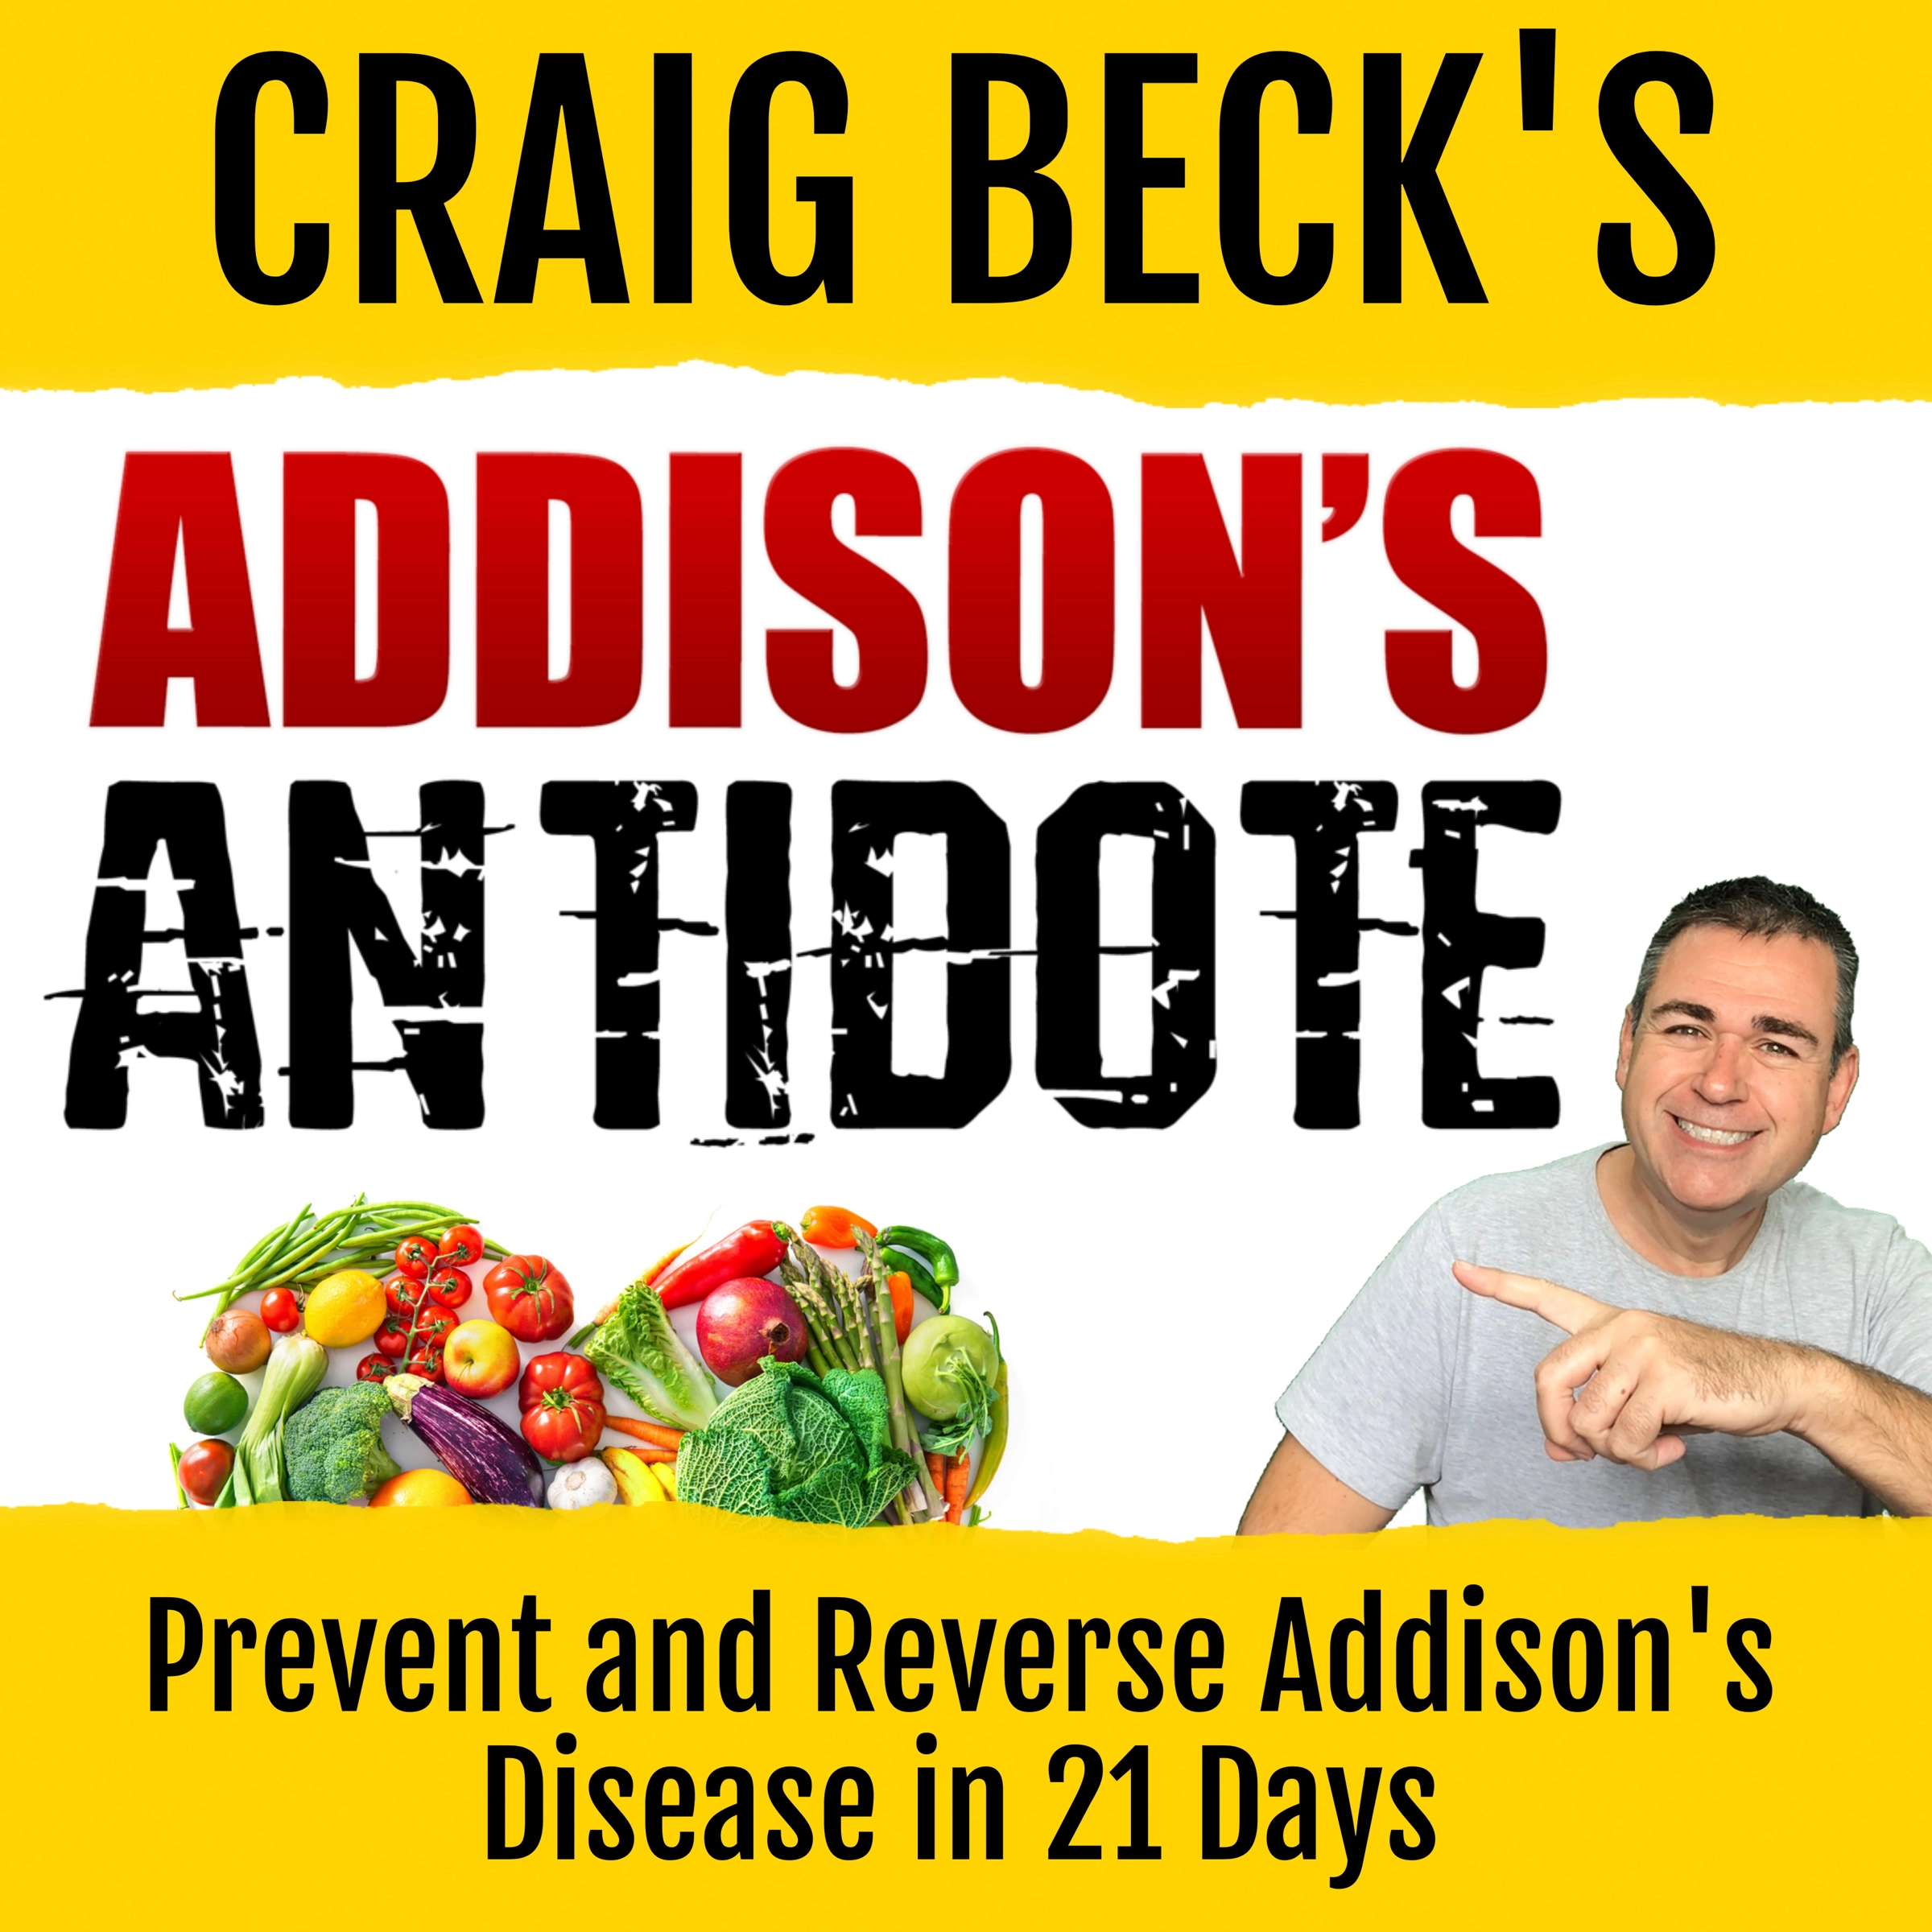 Addison’s Antidote Audiobook by Craig Beck